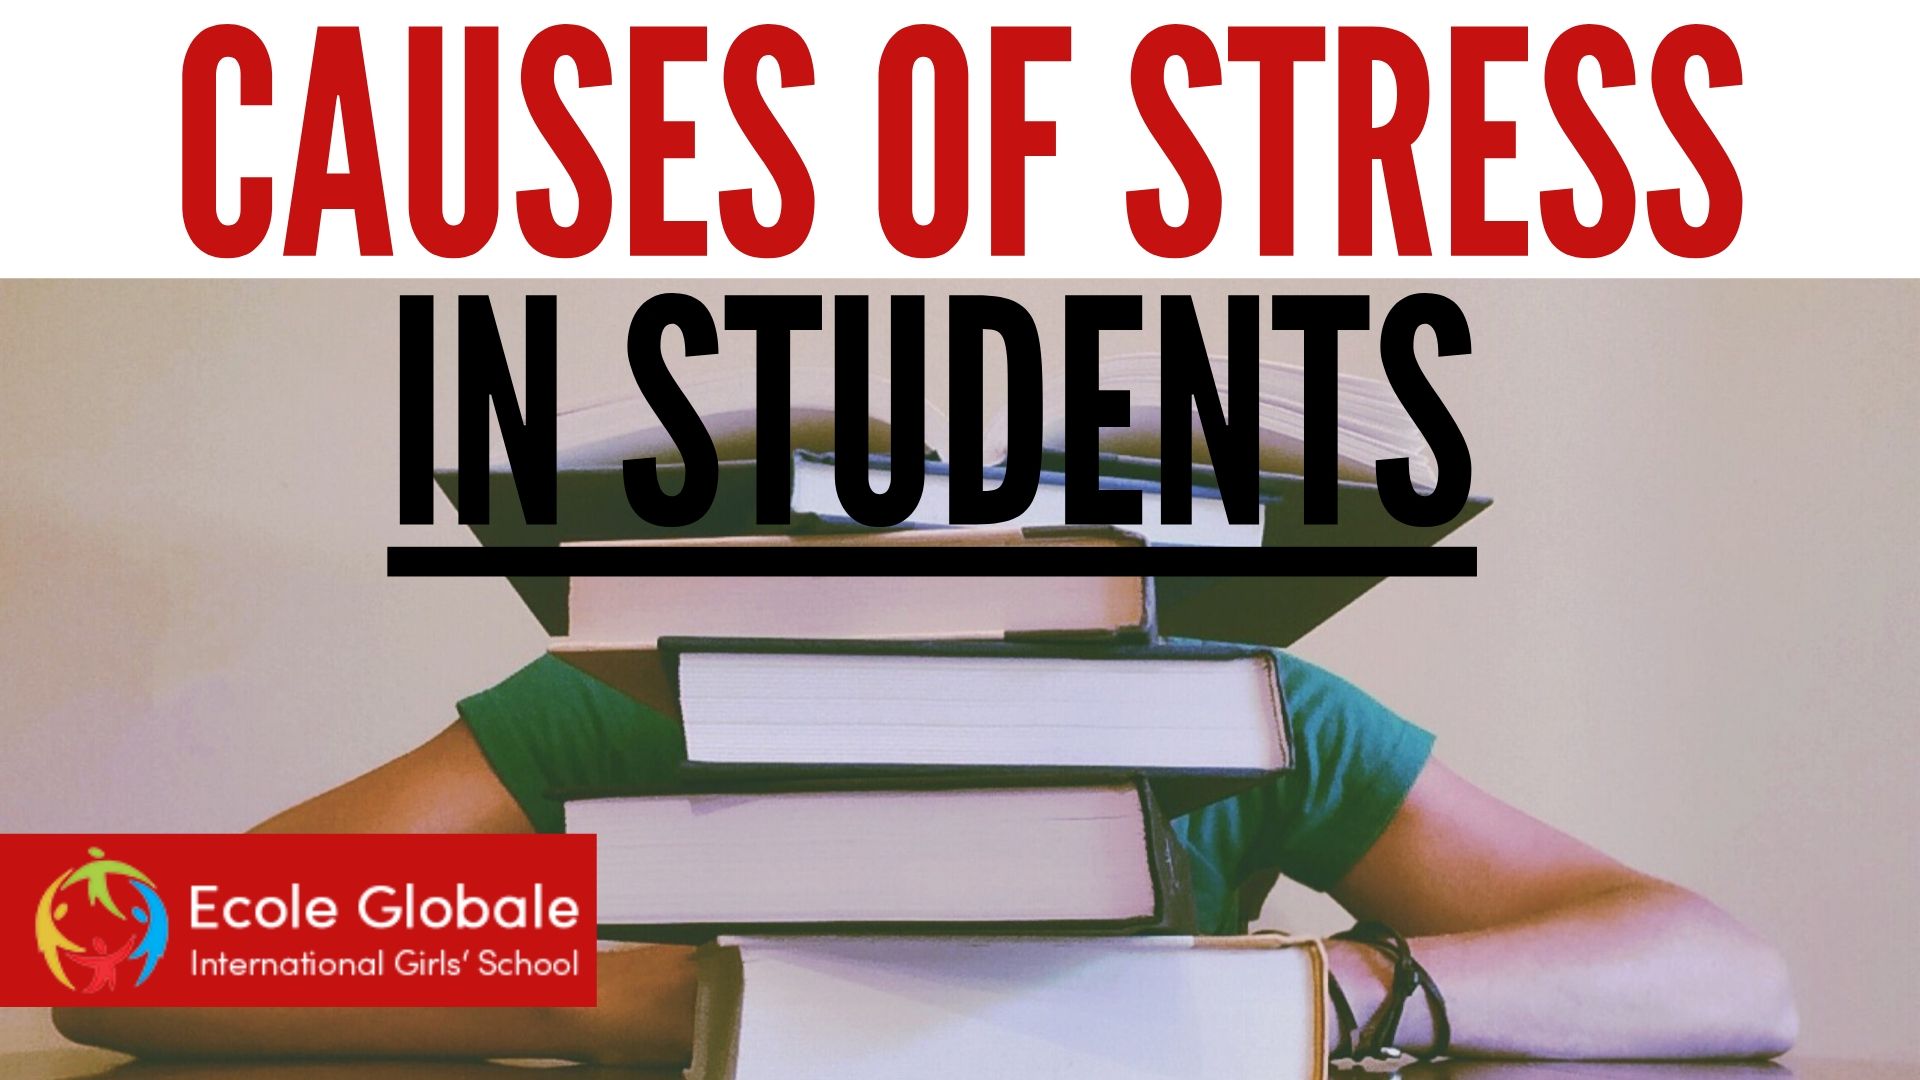 Comforting stressed students bigger challenge for teachers than teaching